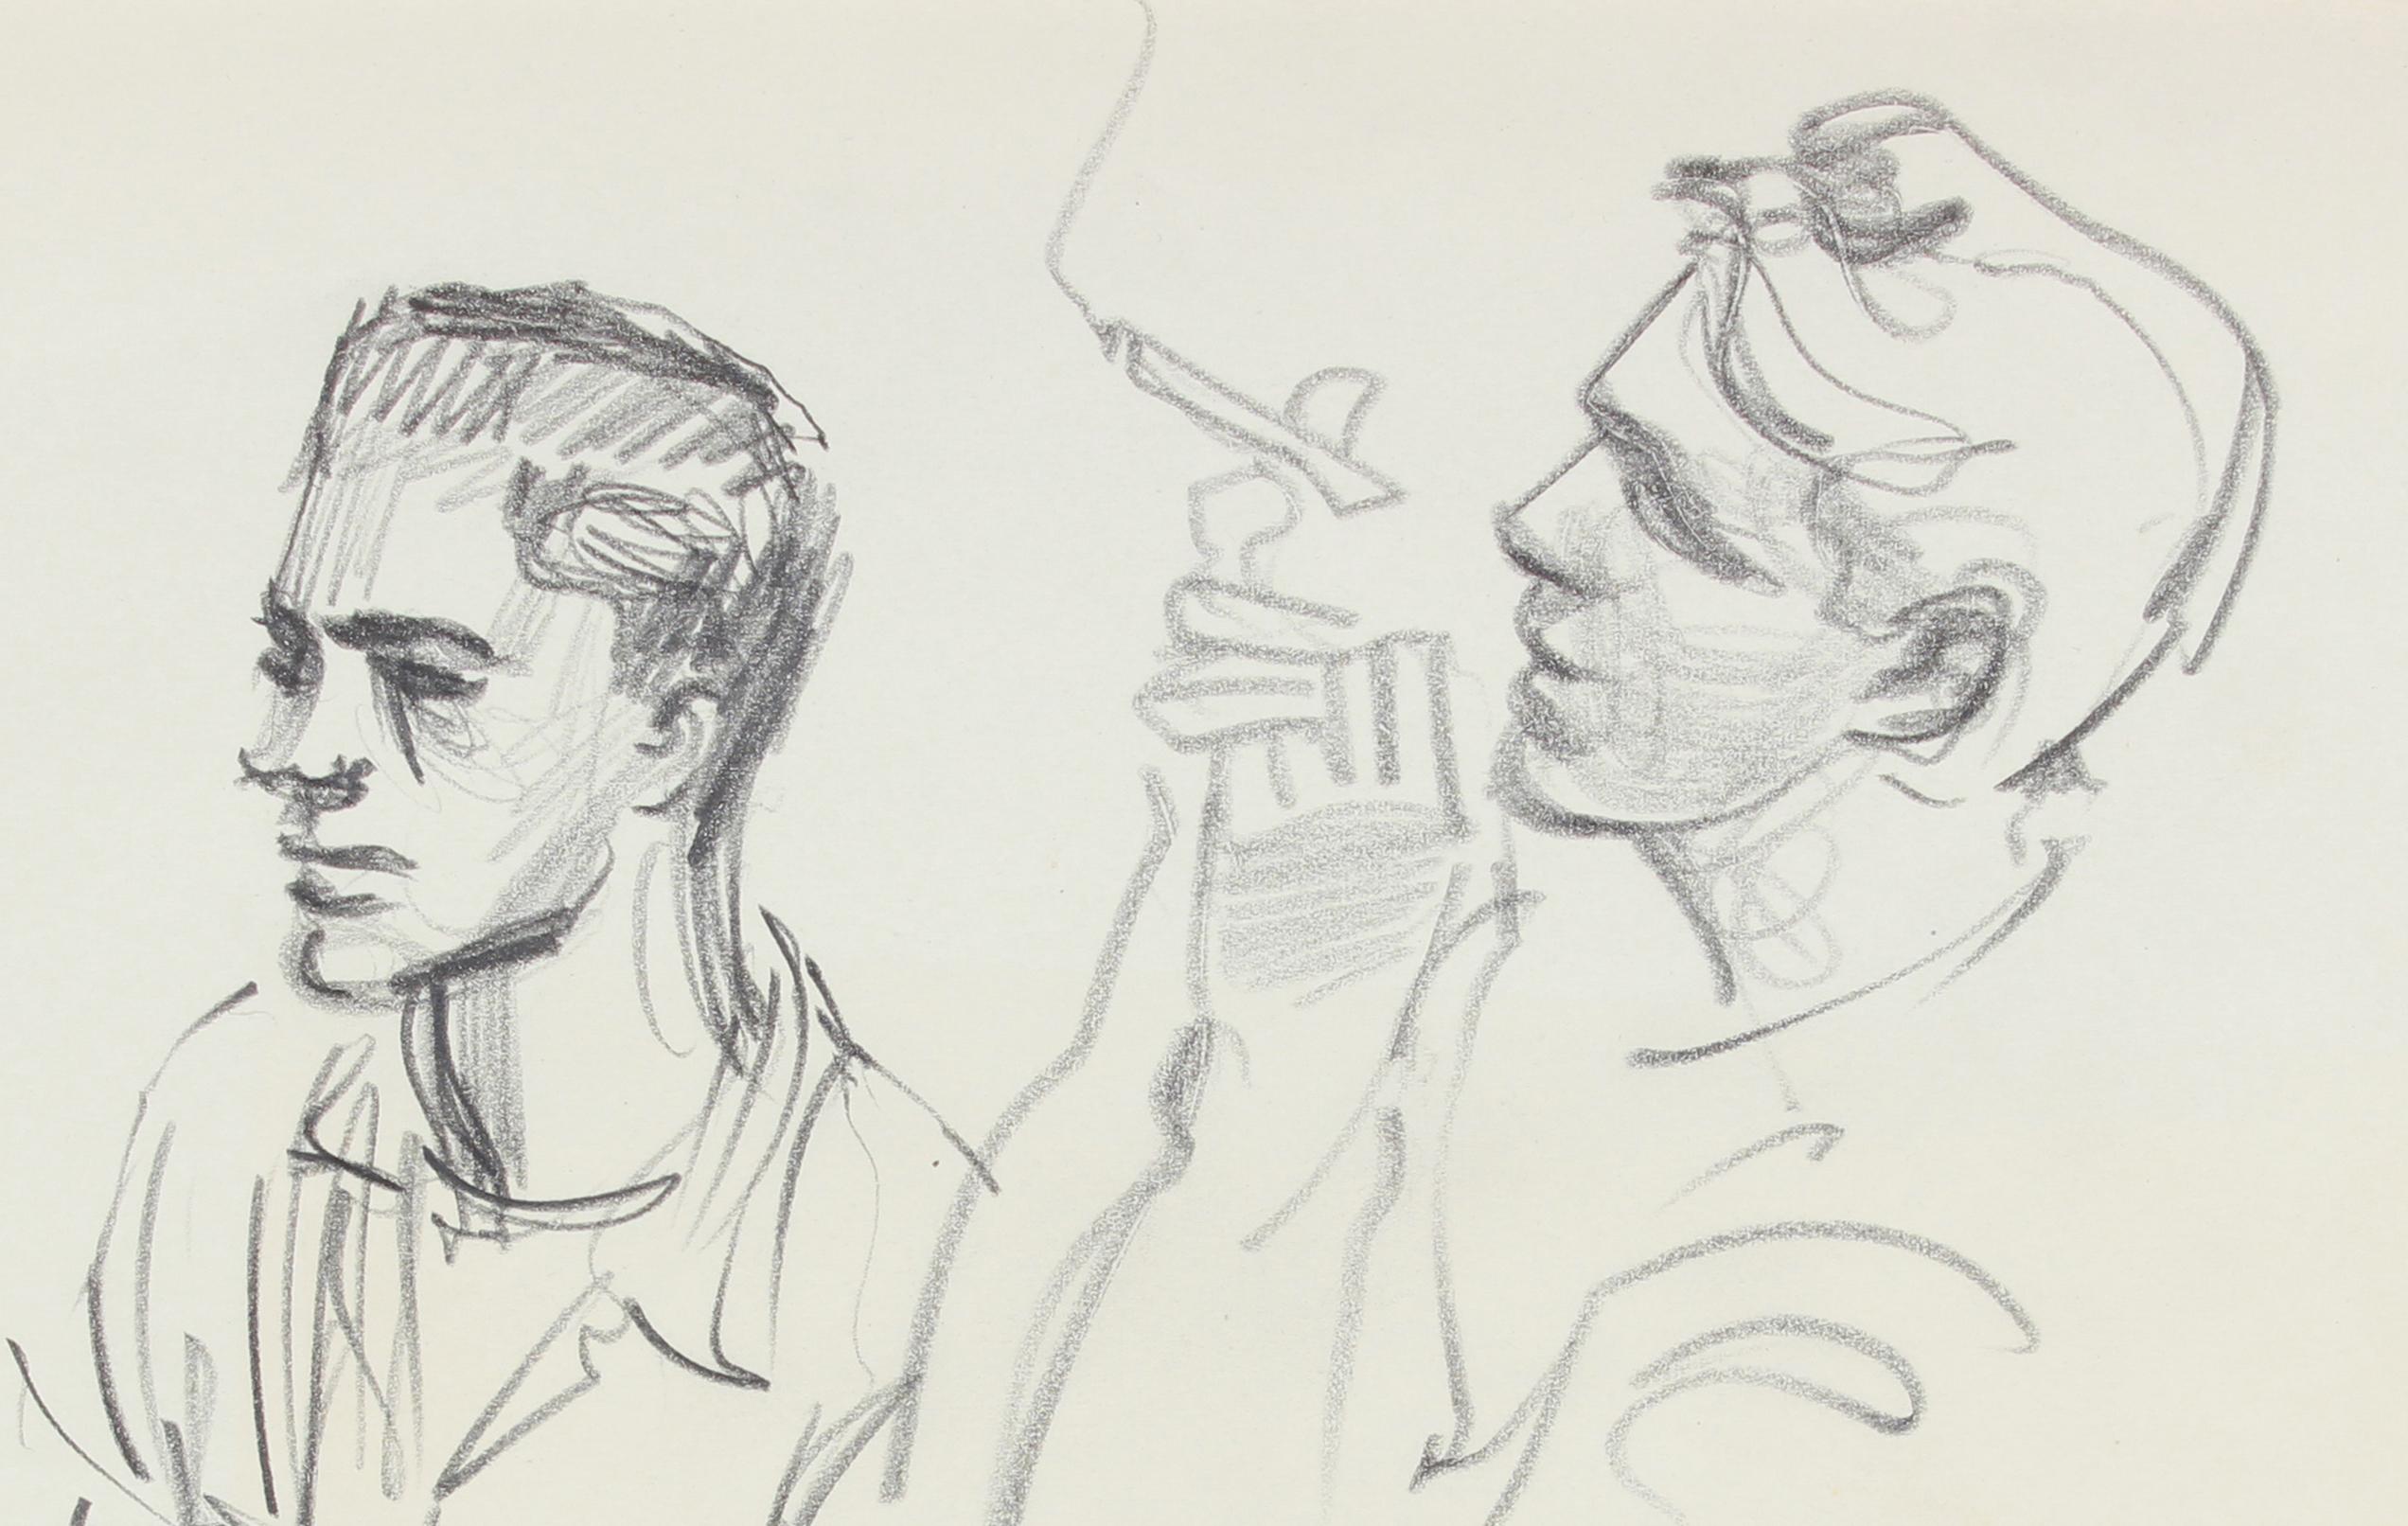 Vintage 1940-50s Charcoal Portrait Study of Young Men Smoking in New York - Abstract Expressionist Art by Richard Caldwell Brewer